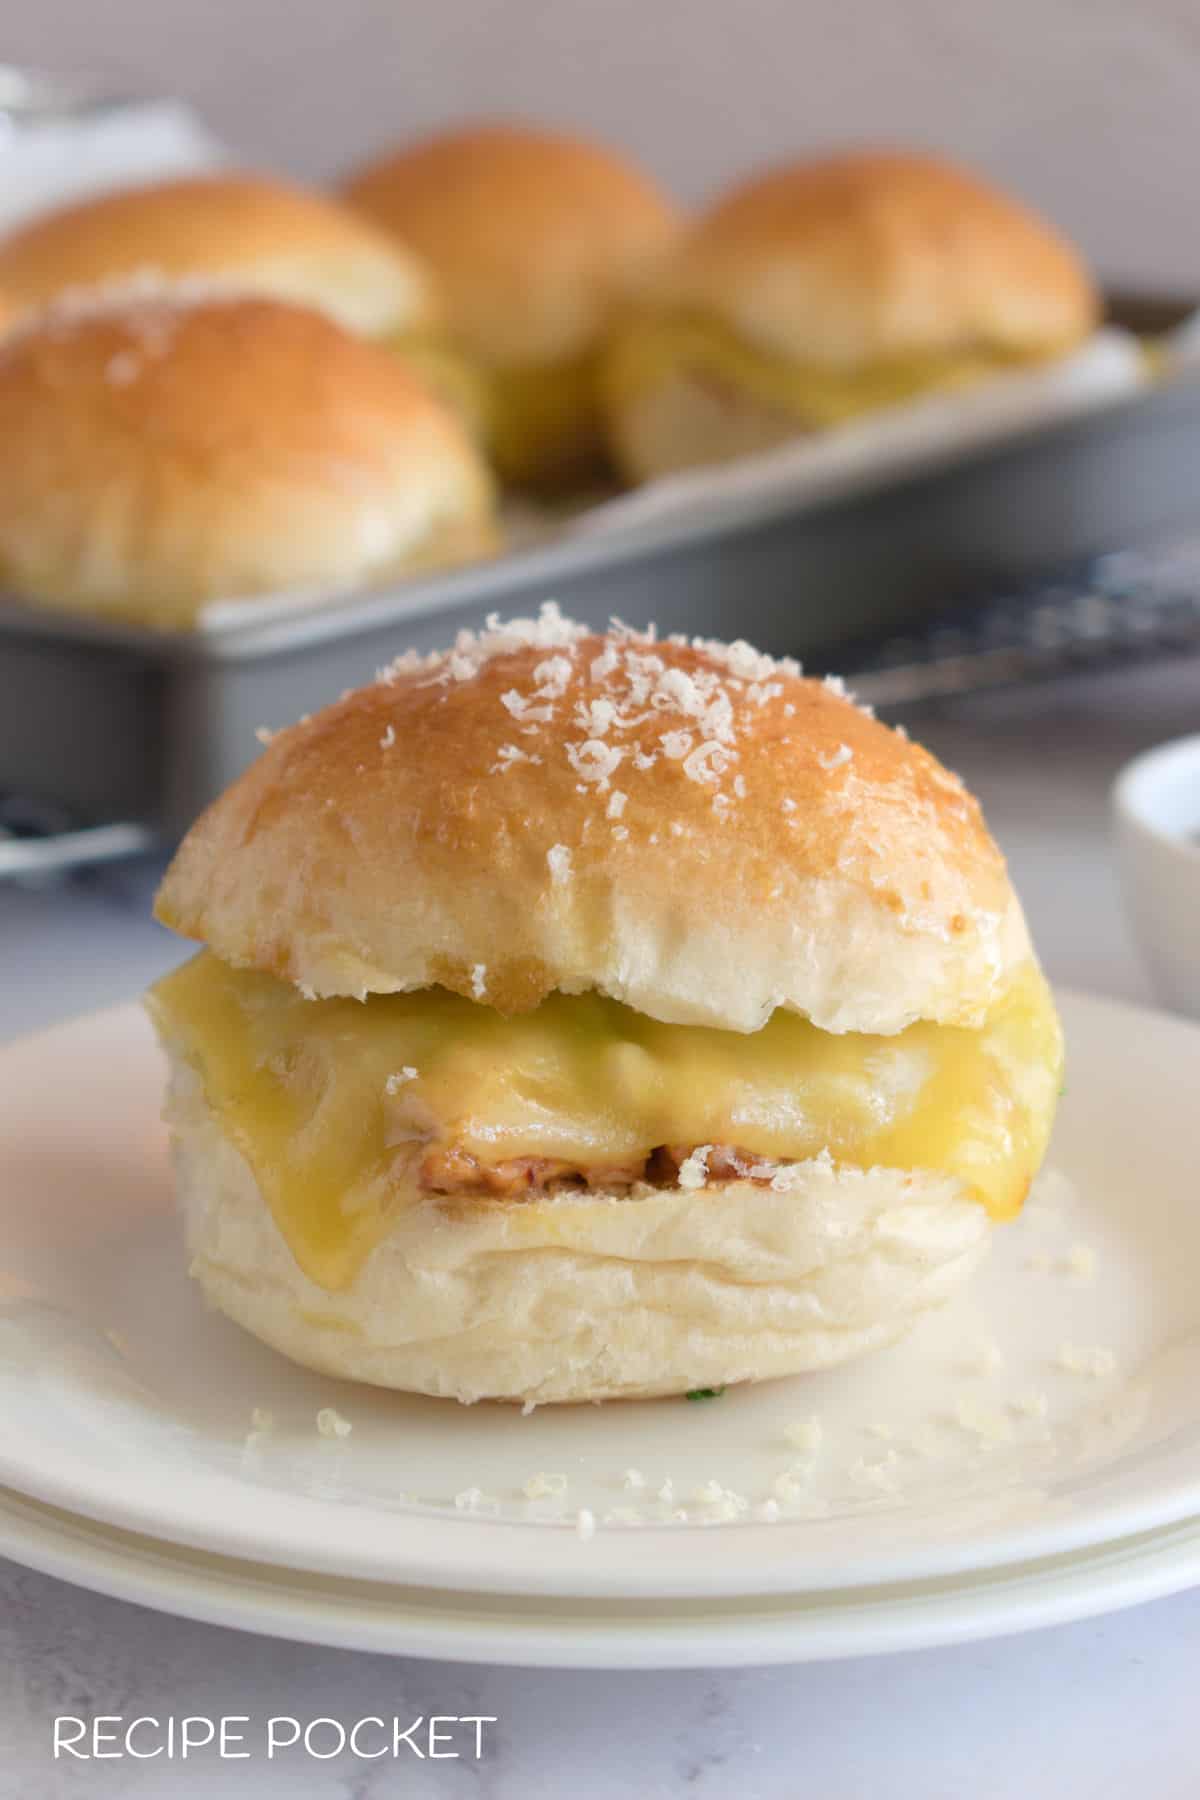 A slider on a plate with a tray of  sliders in the background.